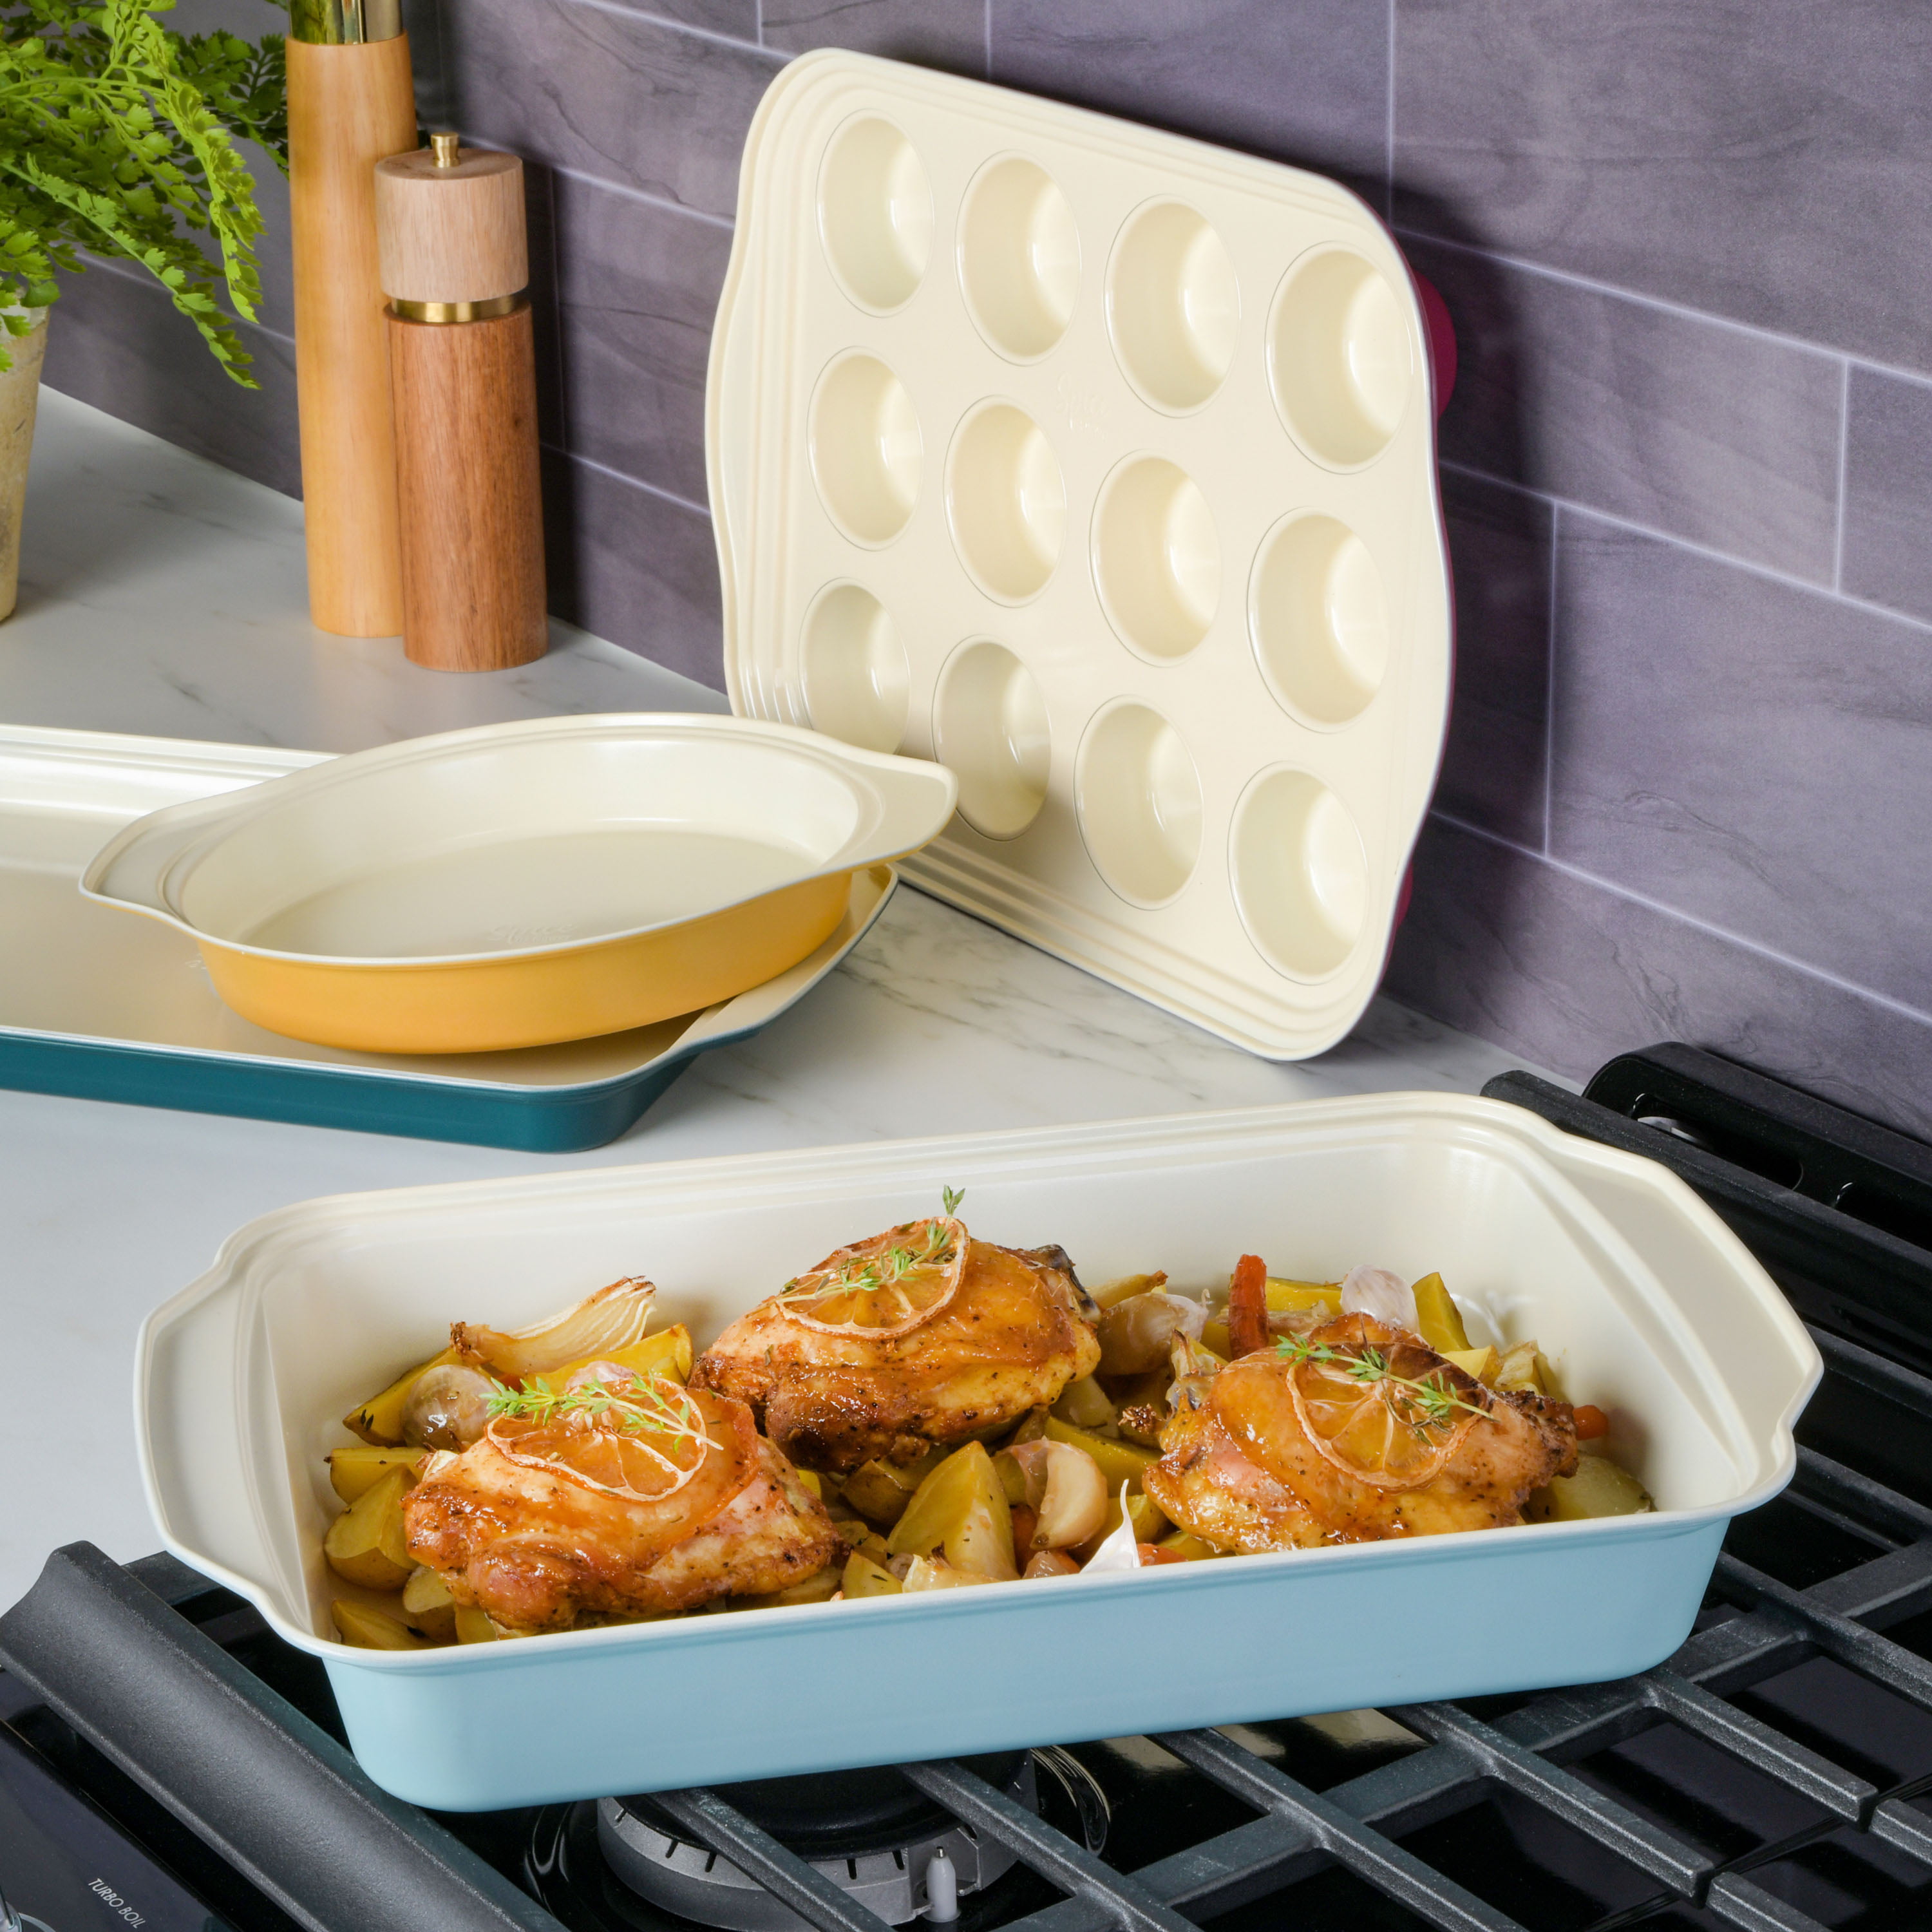 Spice by Tia Mowry 24 Cup Carbon Steel Muffin Pan with Carrier in Teal